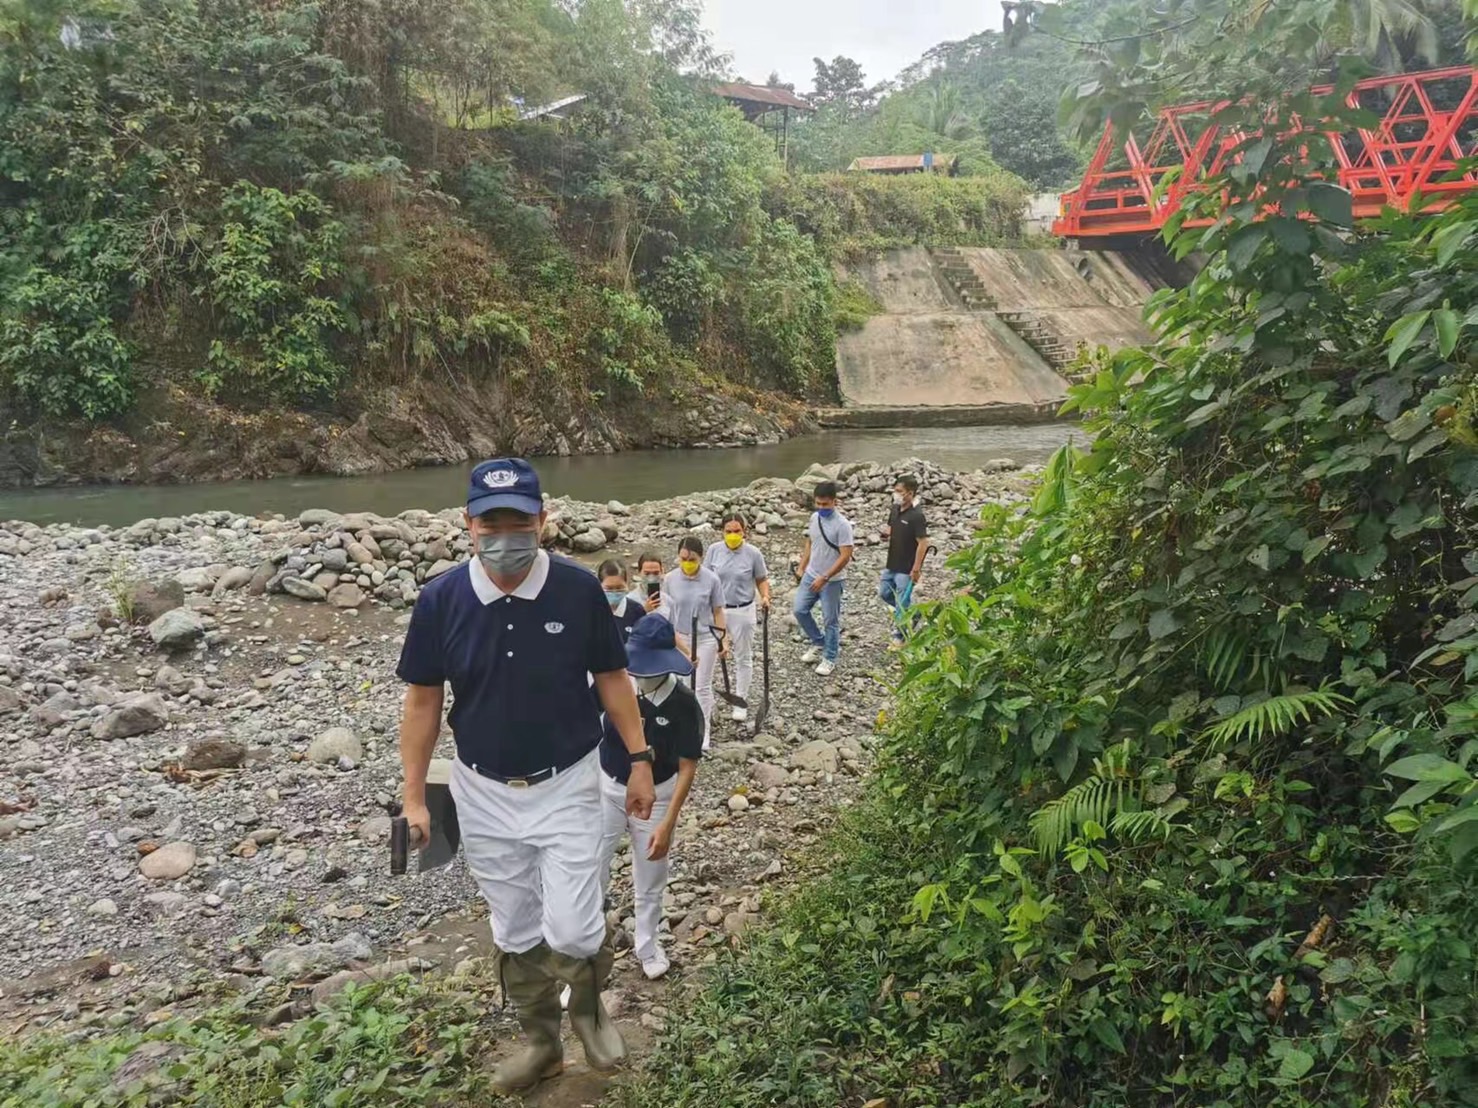 With shovel in hand, Tzu Chi Davao volunteers led by Nelson Chua trek through rocky terrain to get to the site where they will help plant banana seedlings. 